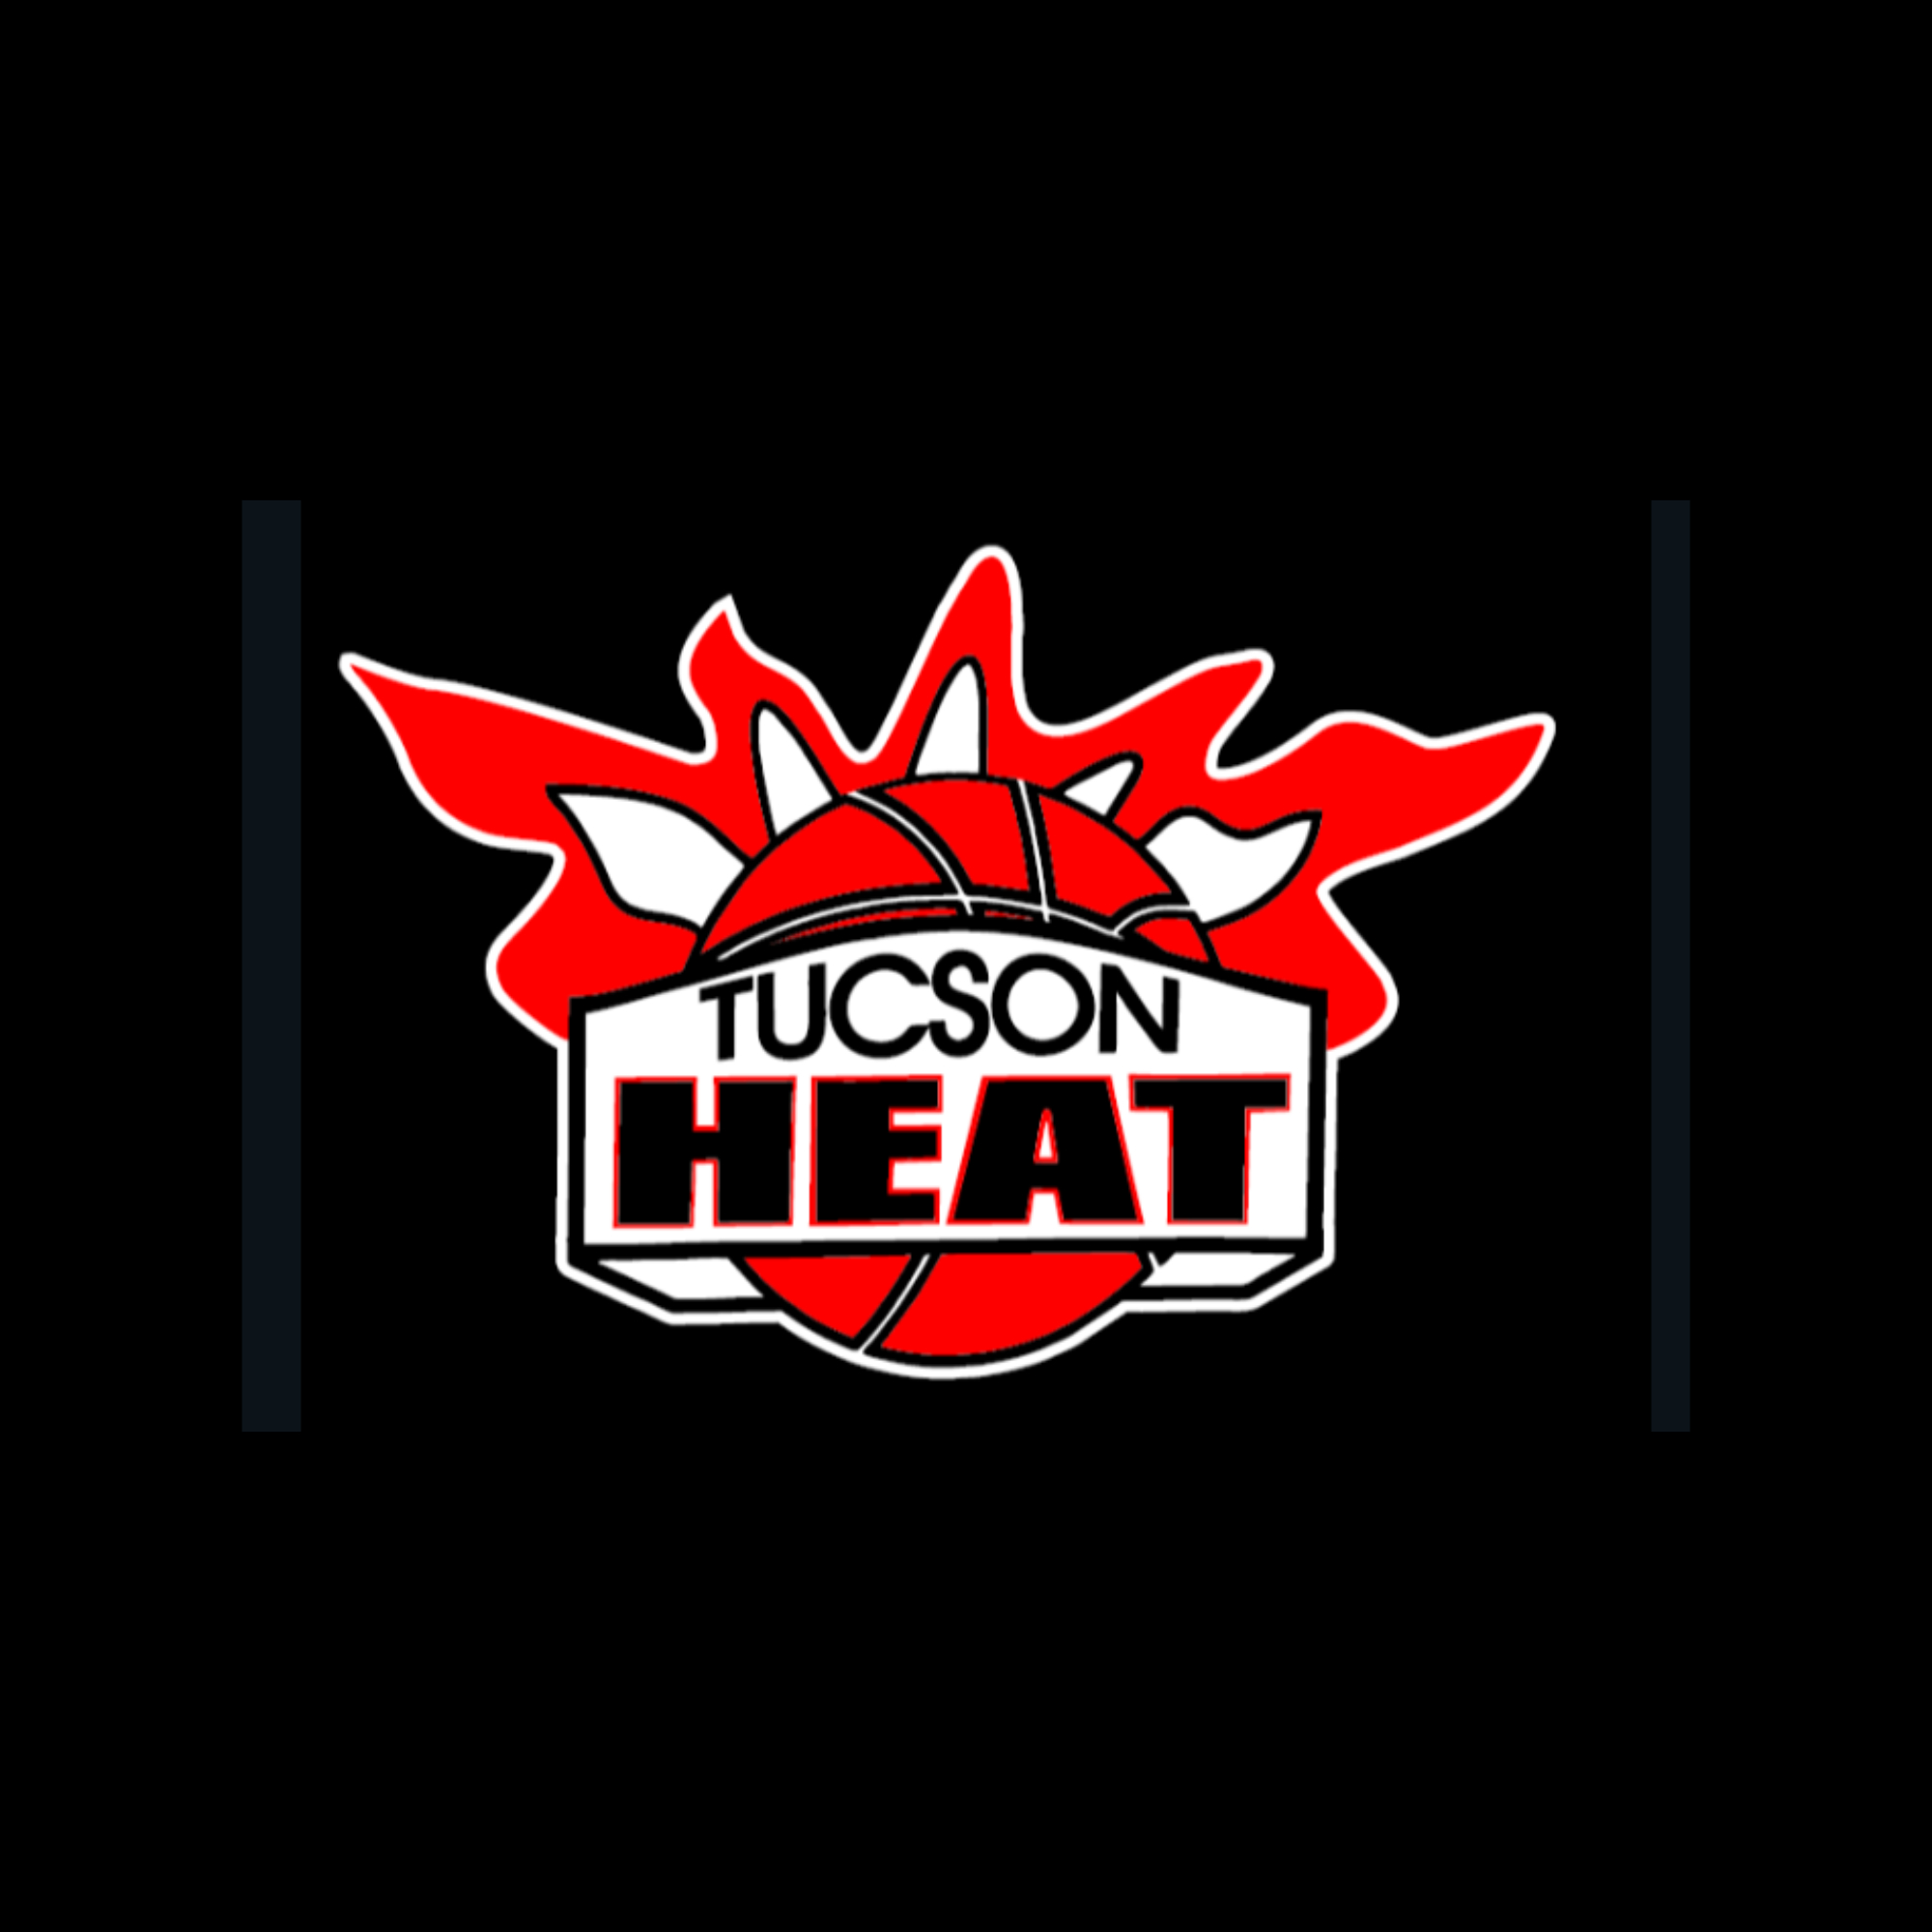 The official logo of Tucson Heat